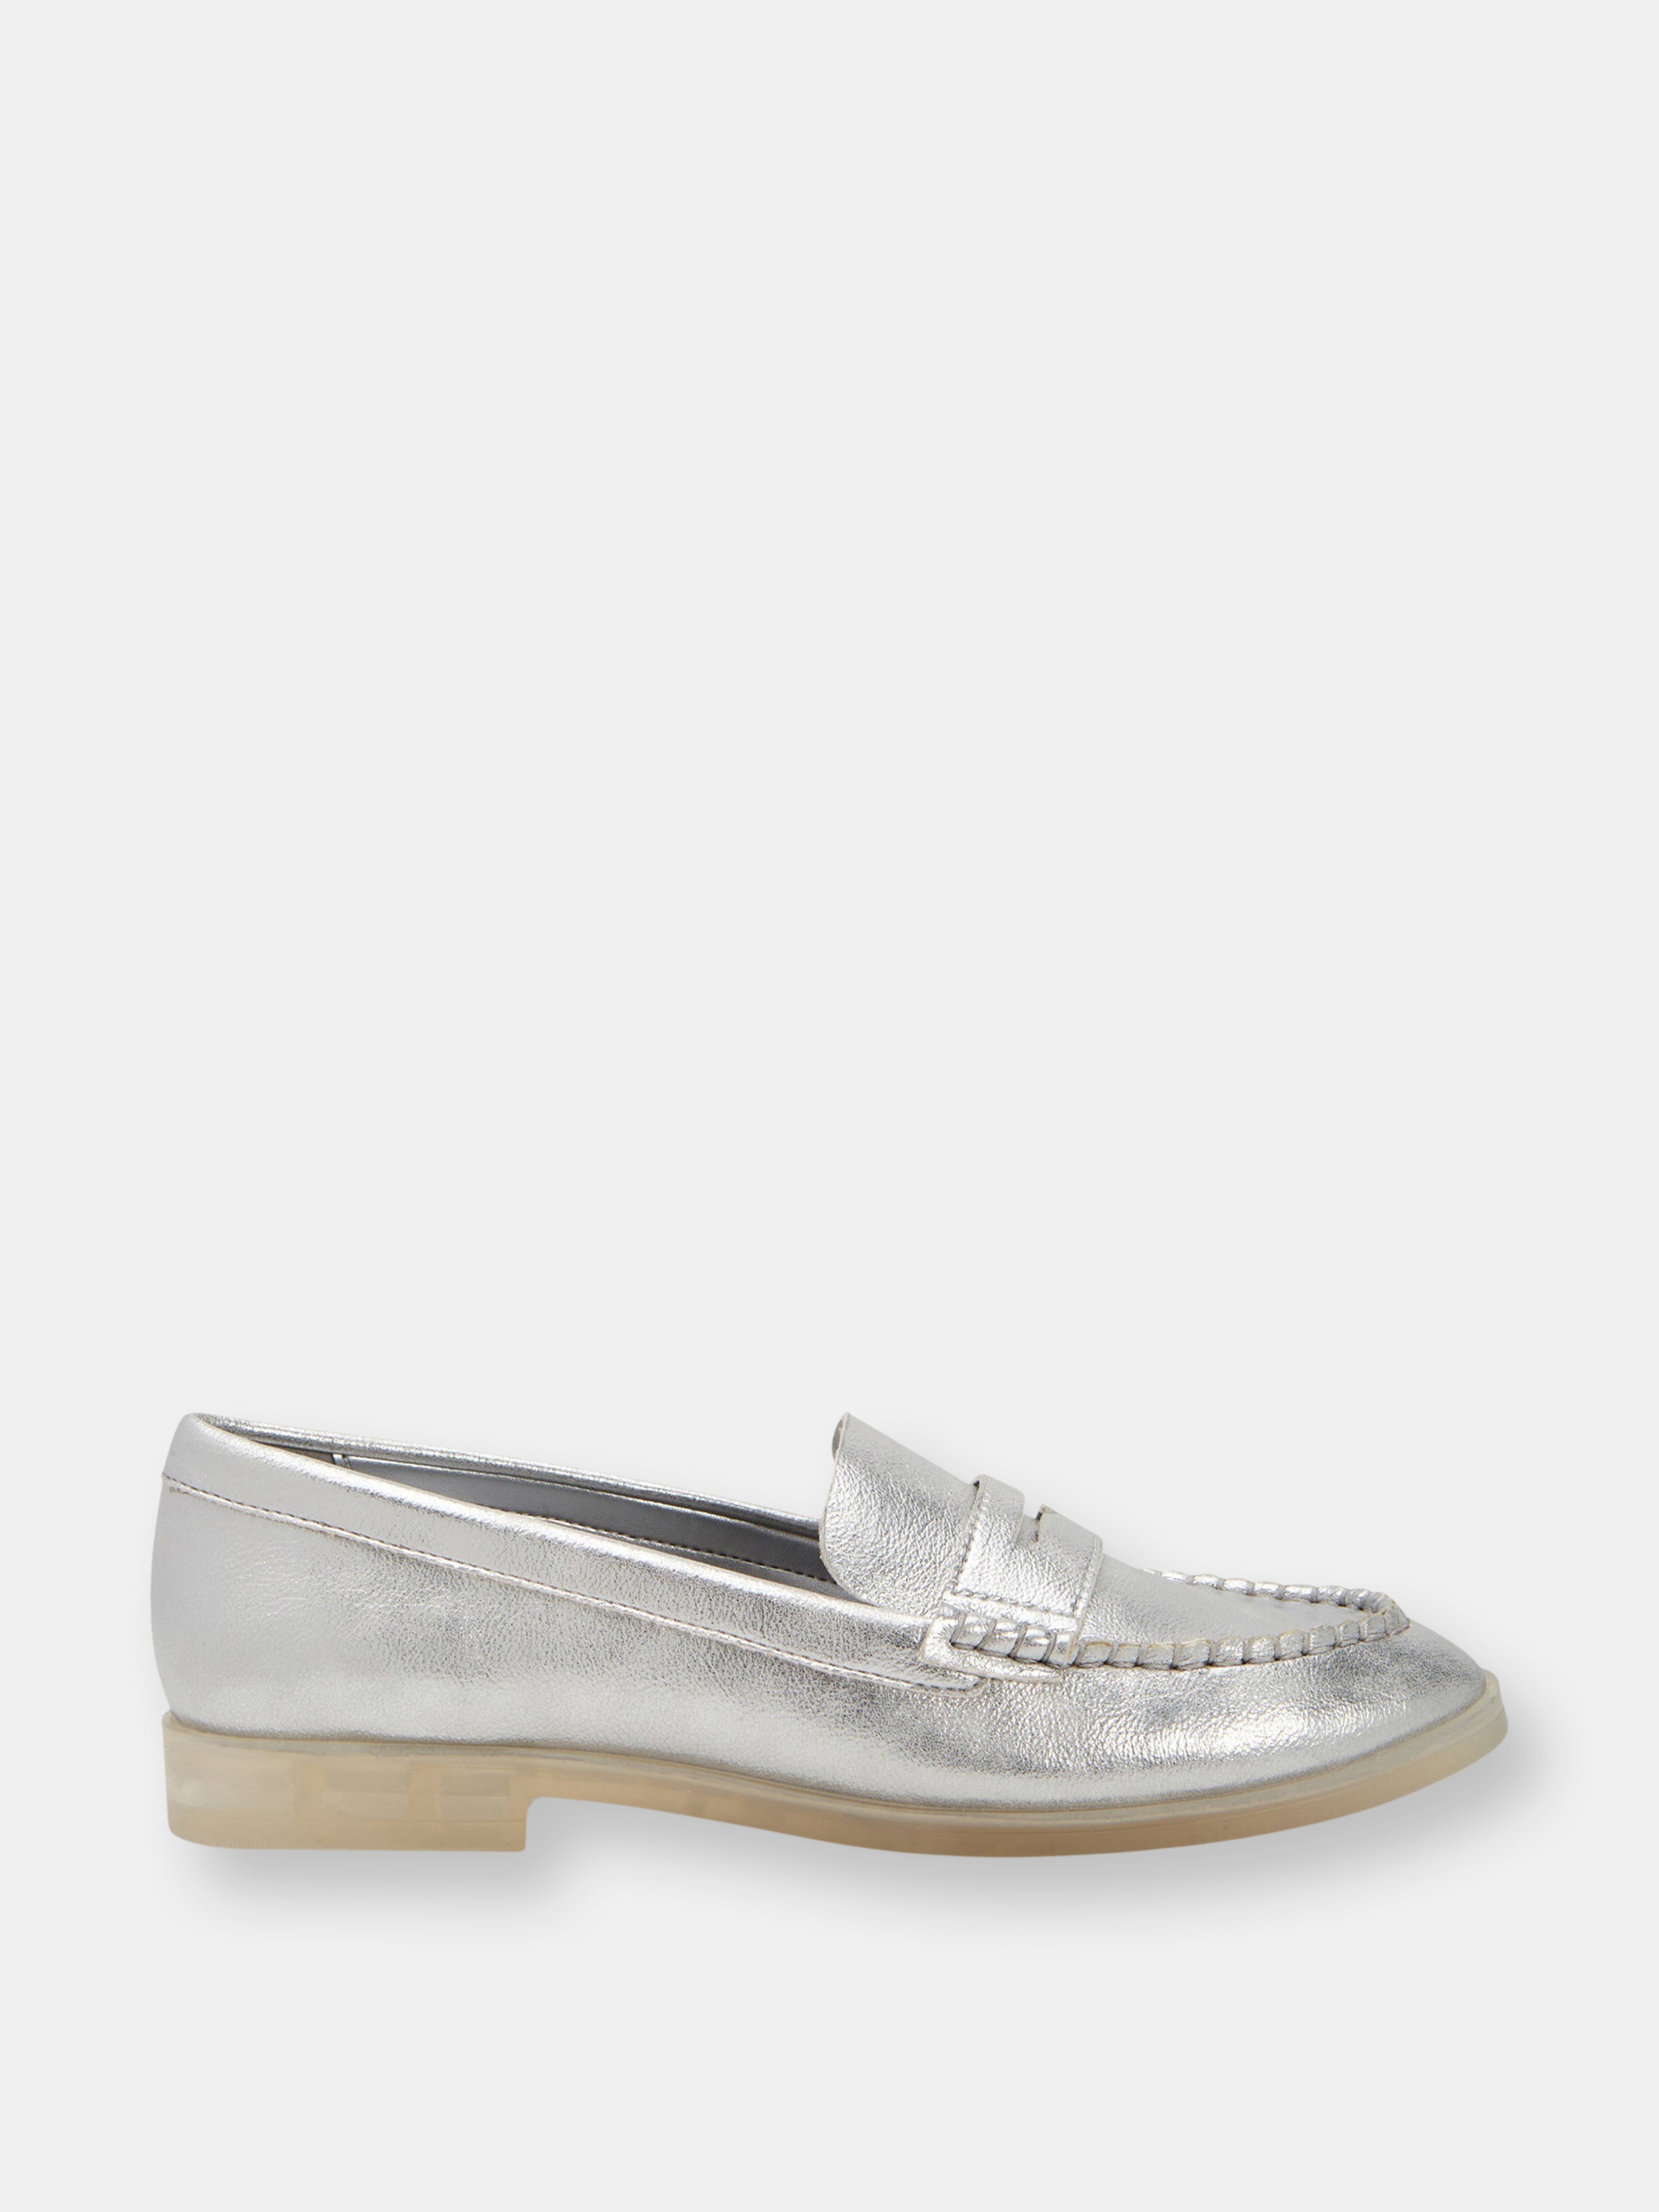 KATY PERRY KATY PERRY THE GELI LOAFER